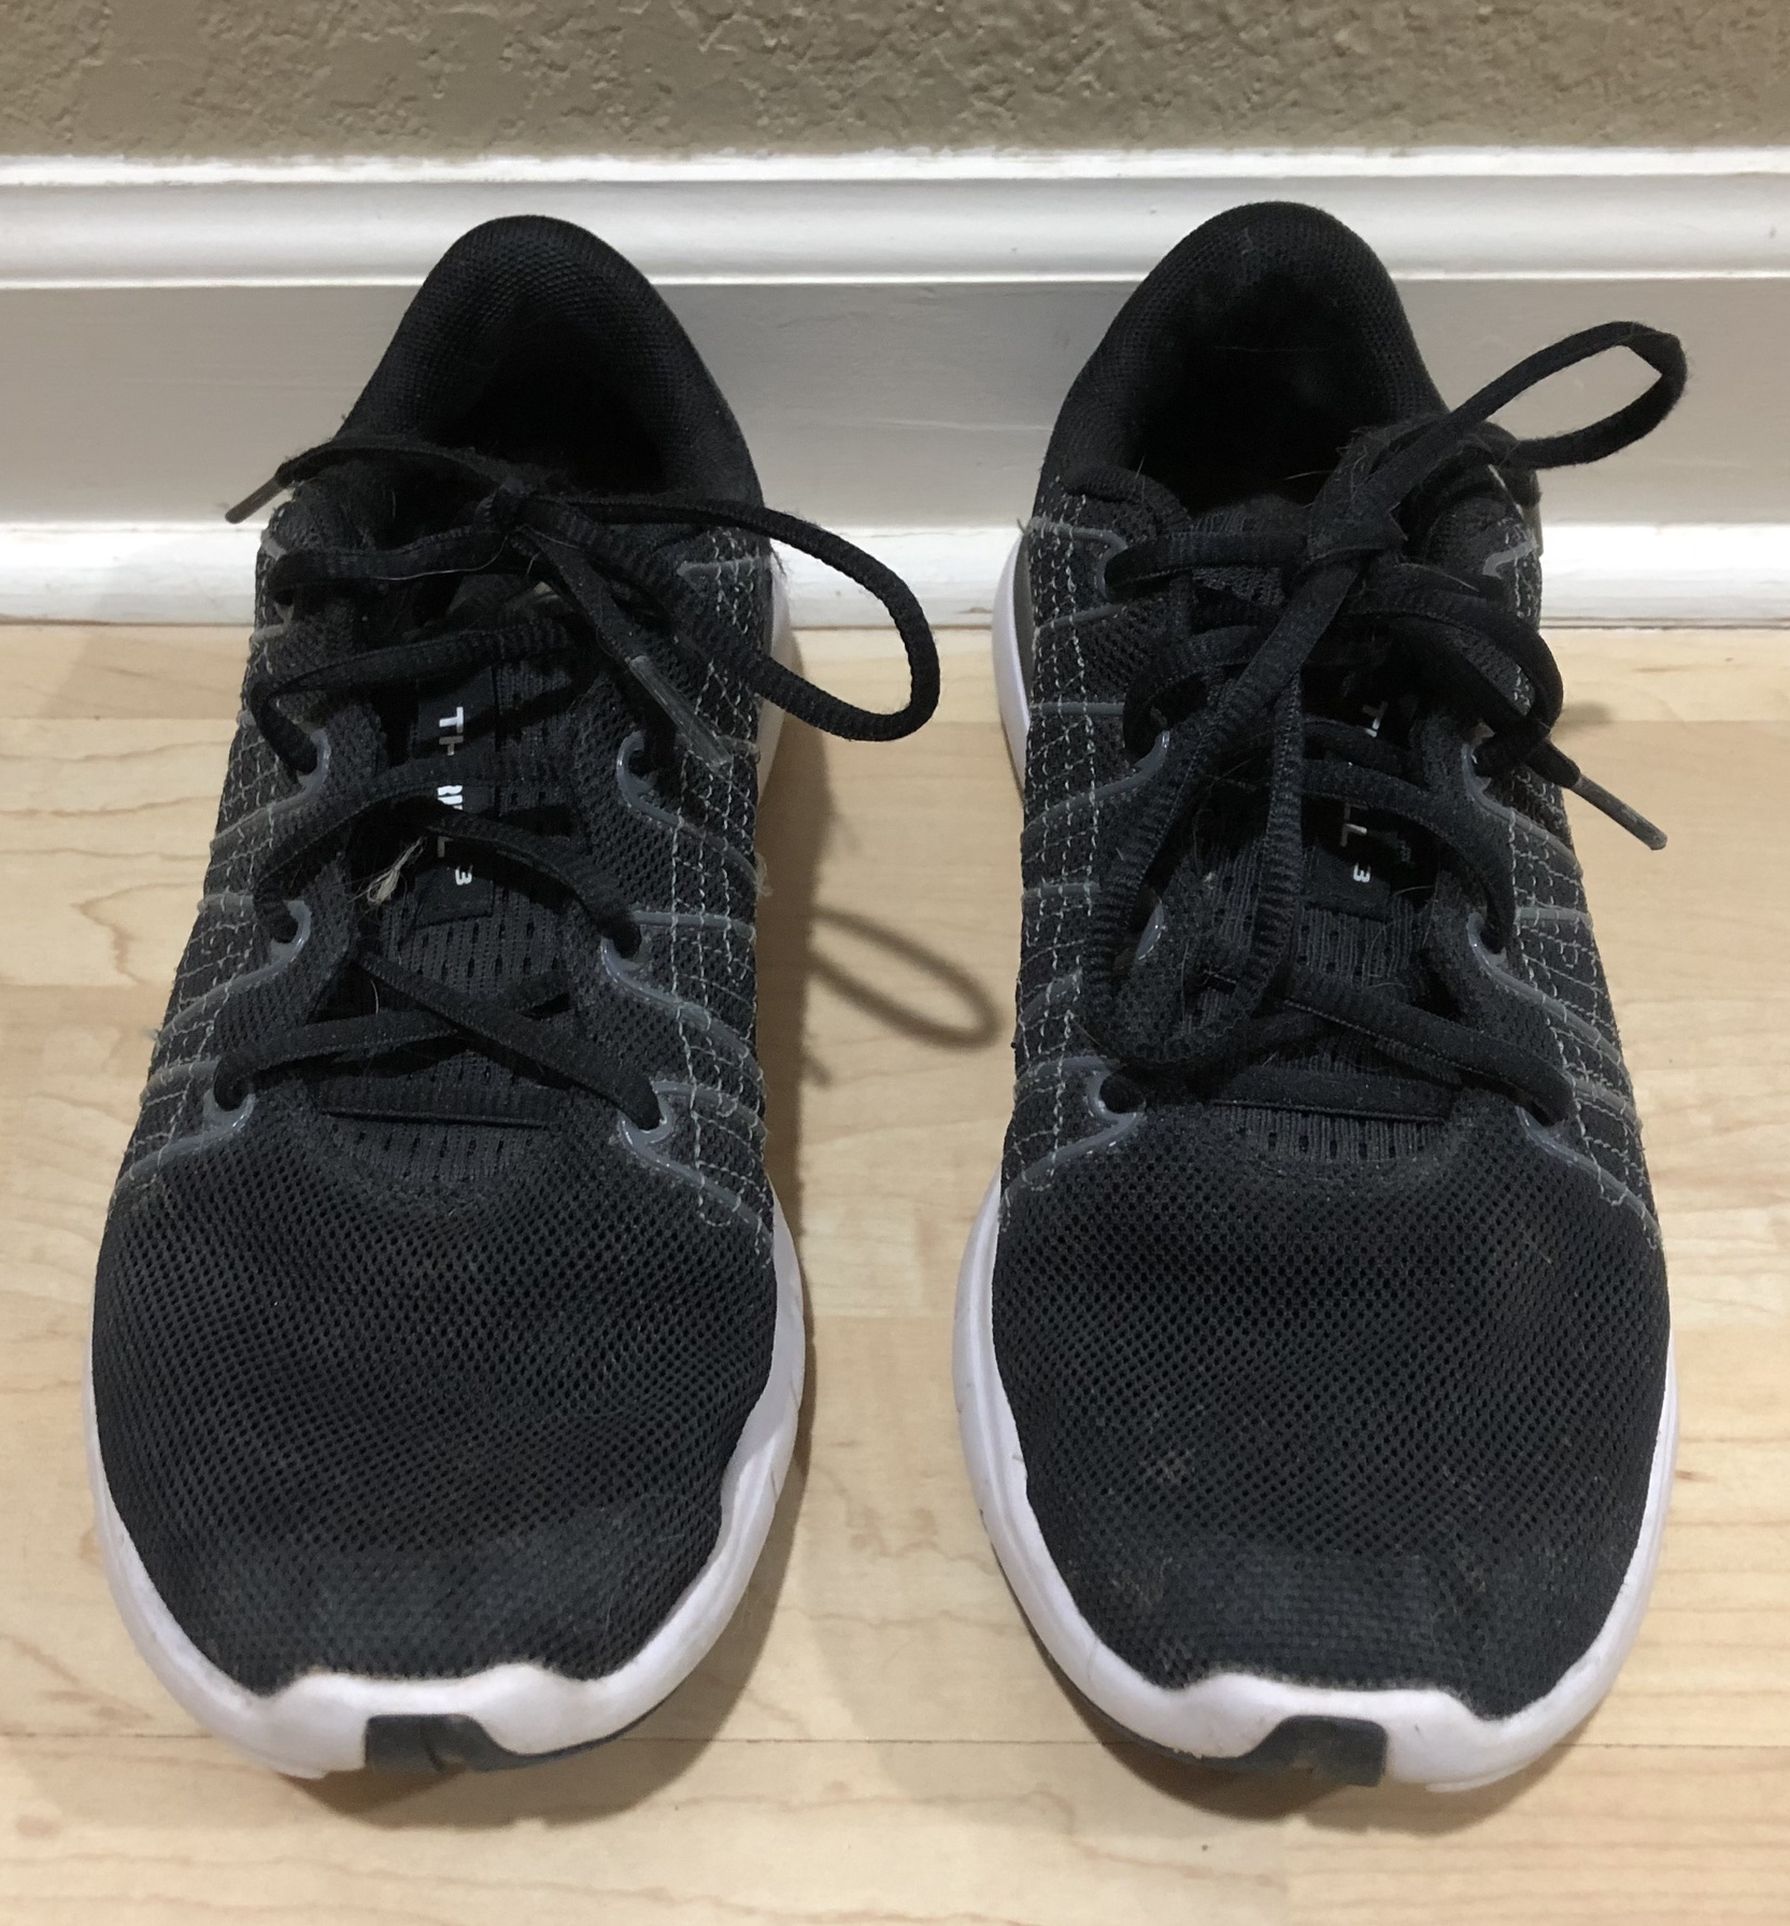 Used women’s under armour running shoes 7